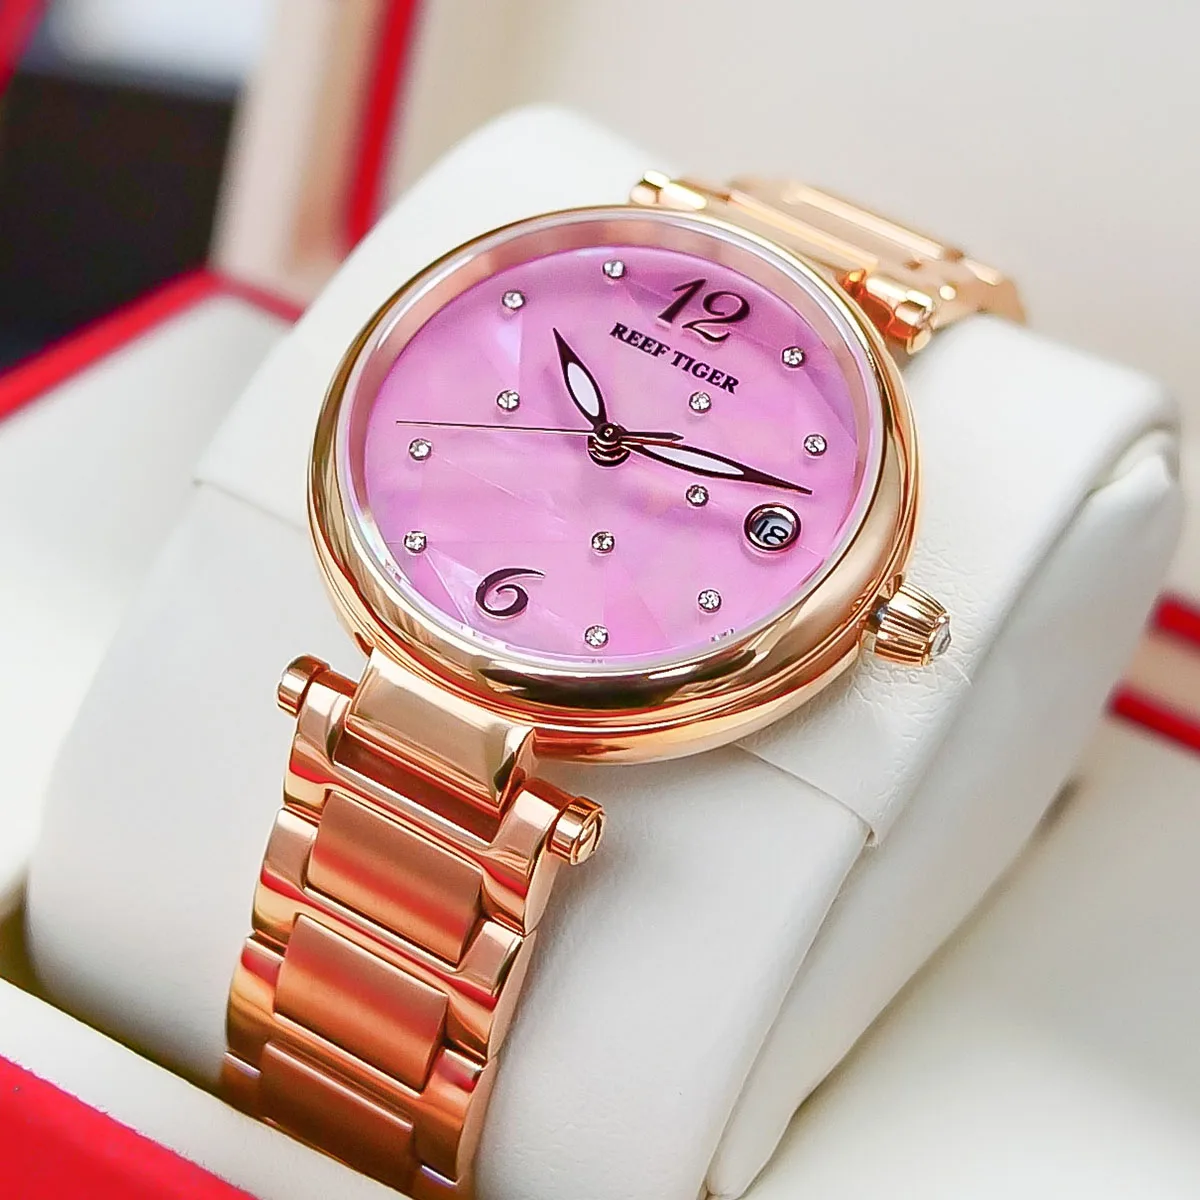 Reef Tiger/RT New Design Luxury Stainless Steel Pink Dial Automatic Watches Women Rose Gold Steel Strip Watch RGA1584 enlarge